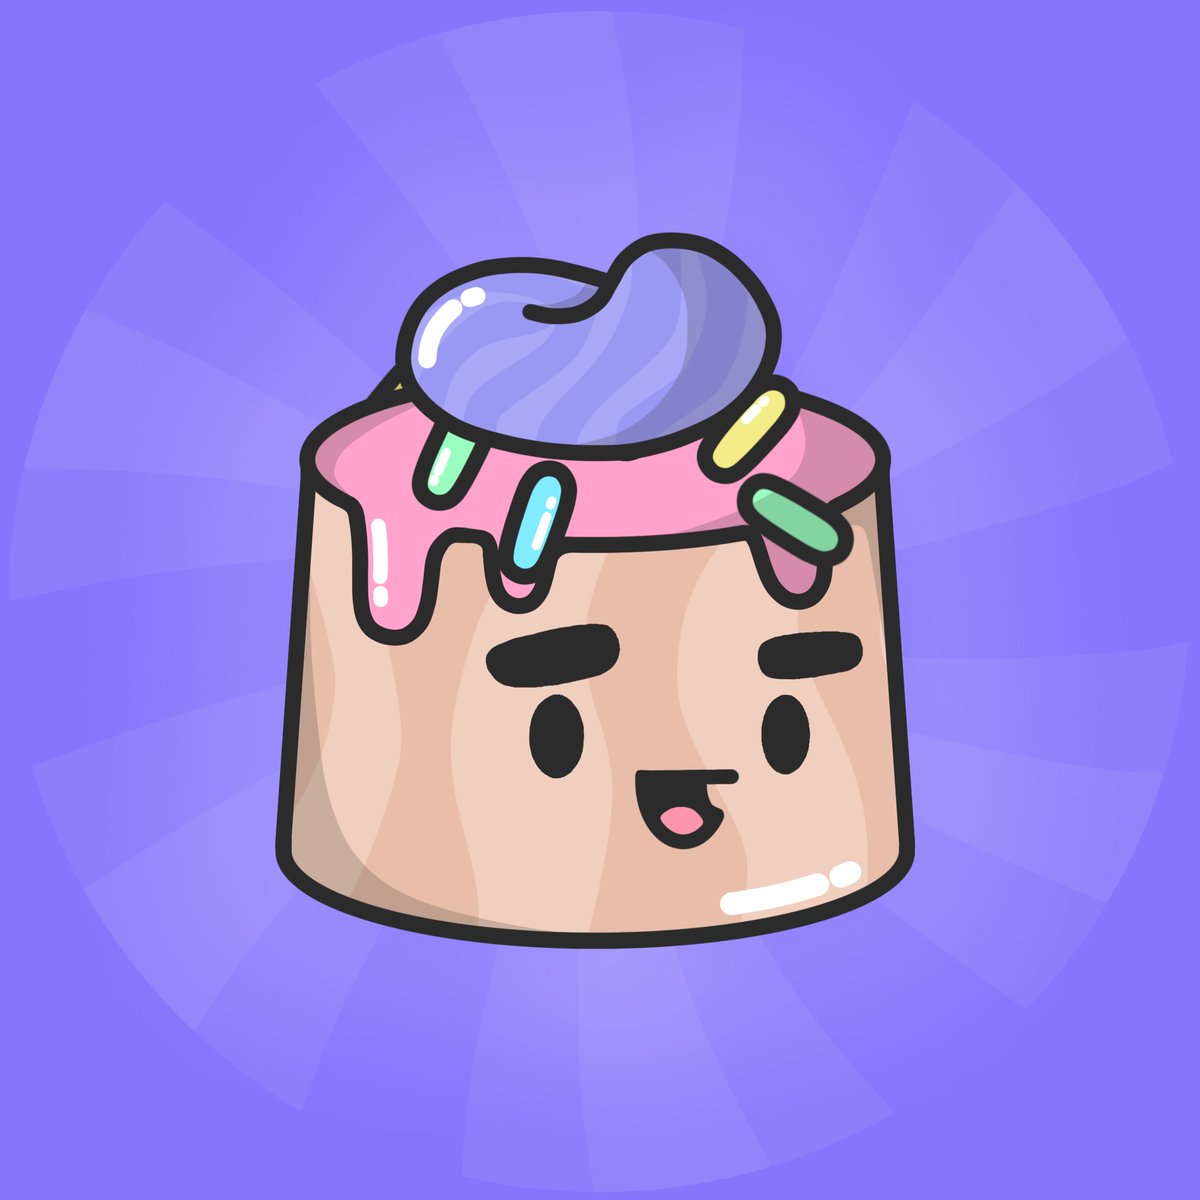 Introducing to you: @KustardsNft 🍮
3999 delicious custards hanging out on Polygon Blockchain.
An Nft project created by Kandies, for Kandies 🍬

🍬🍮🍬🍮🍬🍮🍬🍮🍬🍮🍬🍮🍬🍮

#NFT #Polygon #PolygonNFT #NFTCommunity